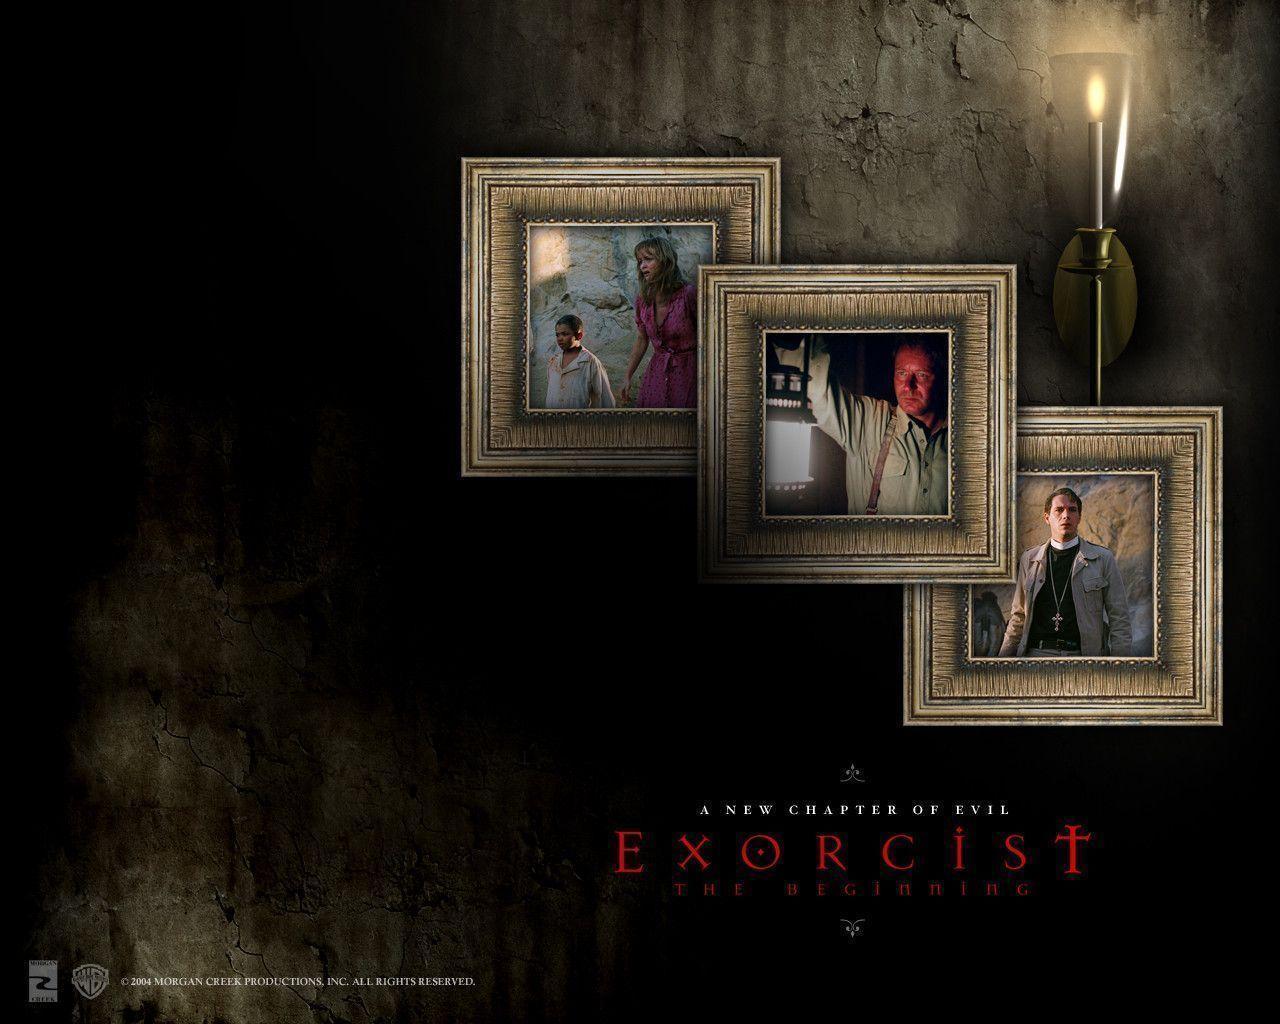 Exorcist The Beginning Wallpaper. Download High Quality